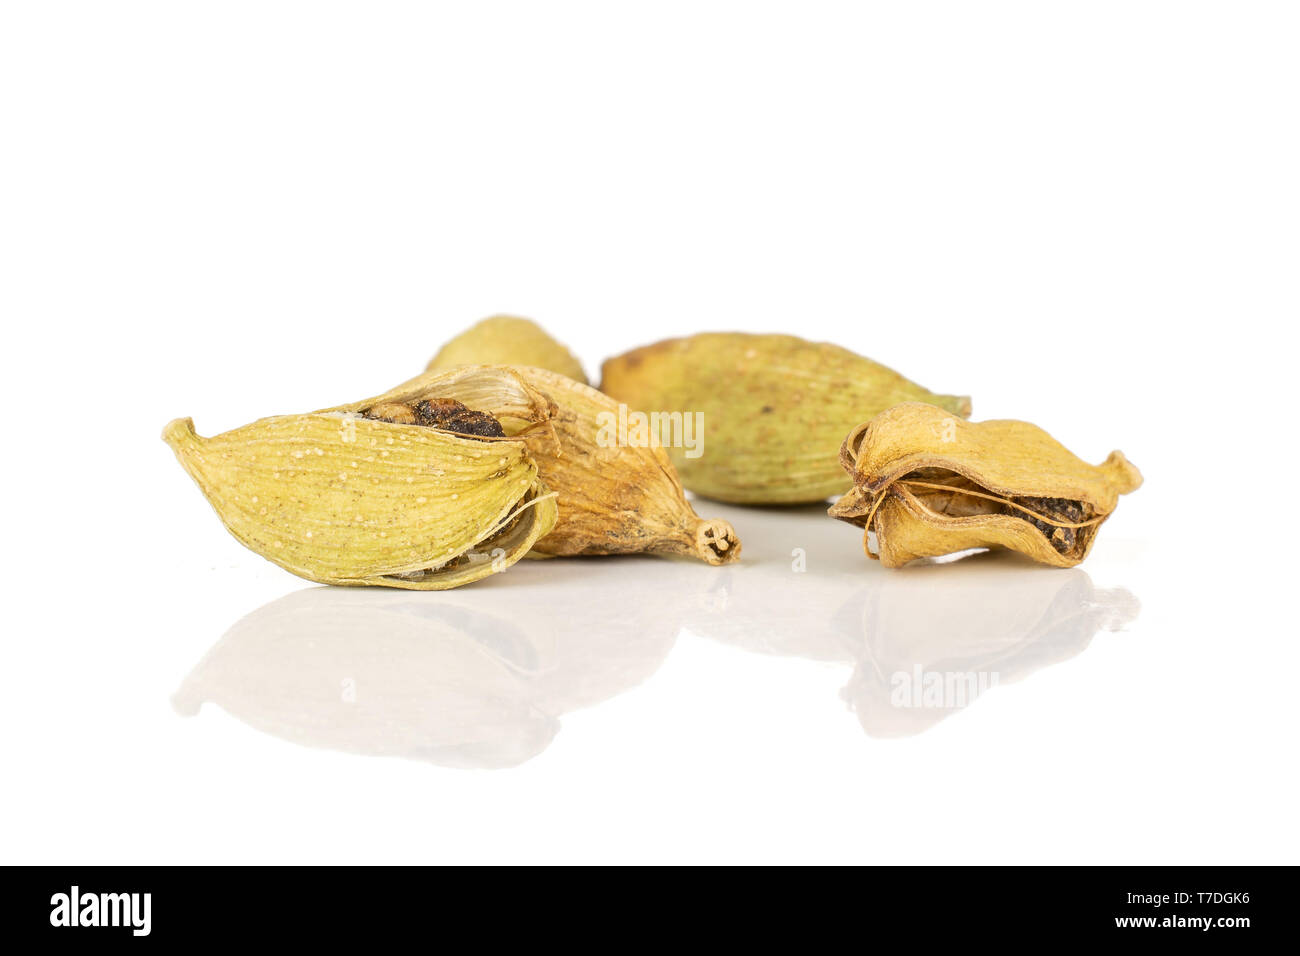 Group of five whole true cardamom pod isolated on white background Stock Photo